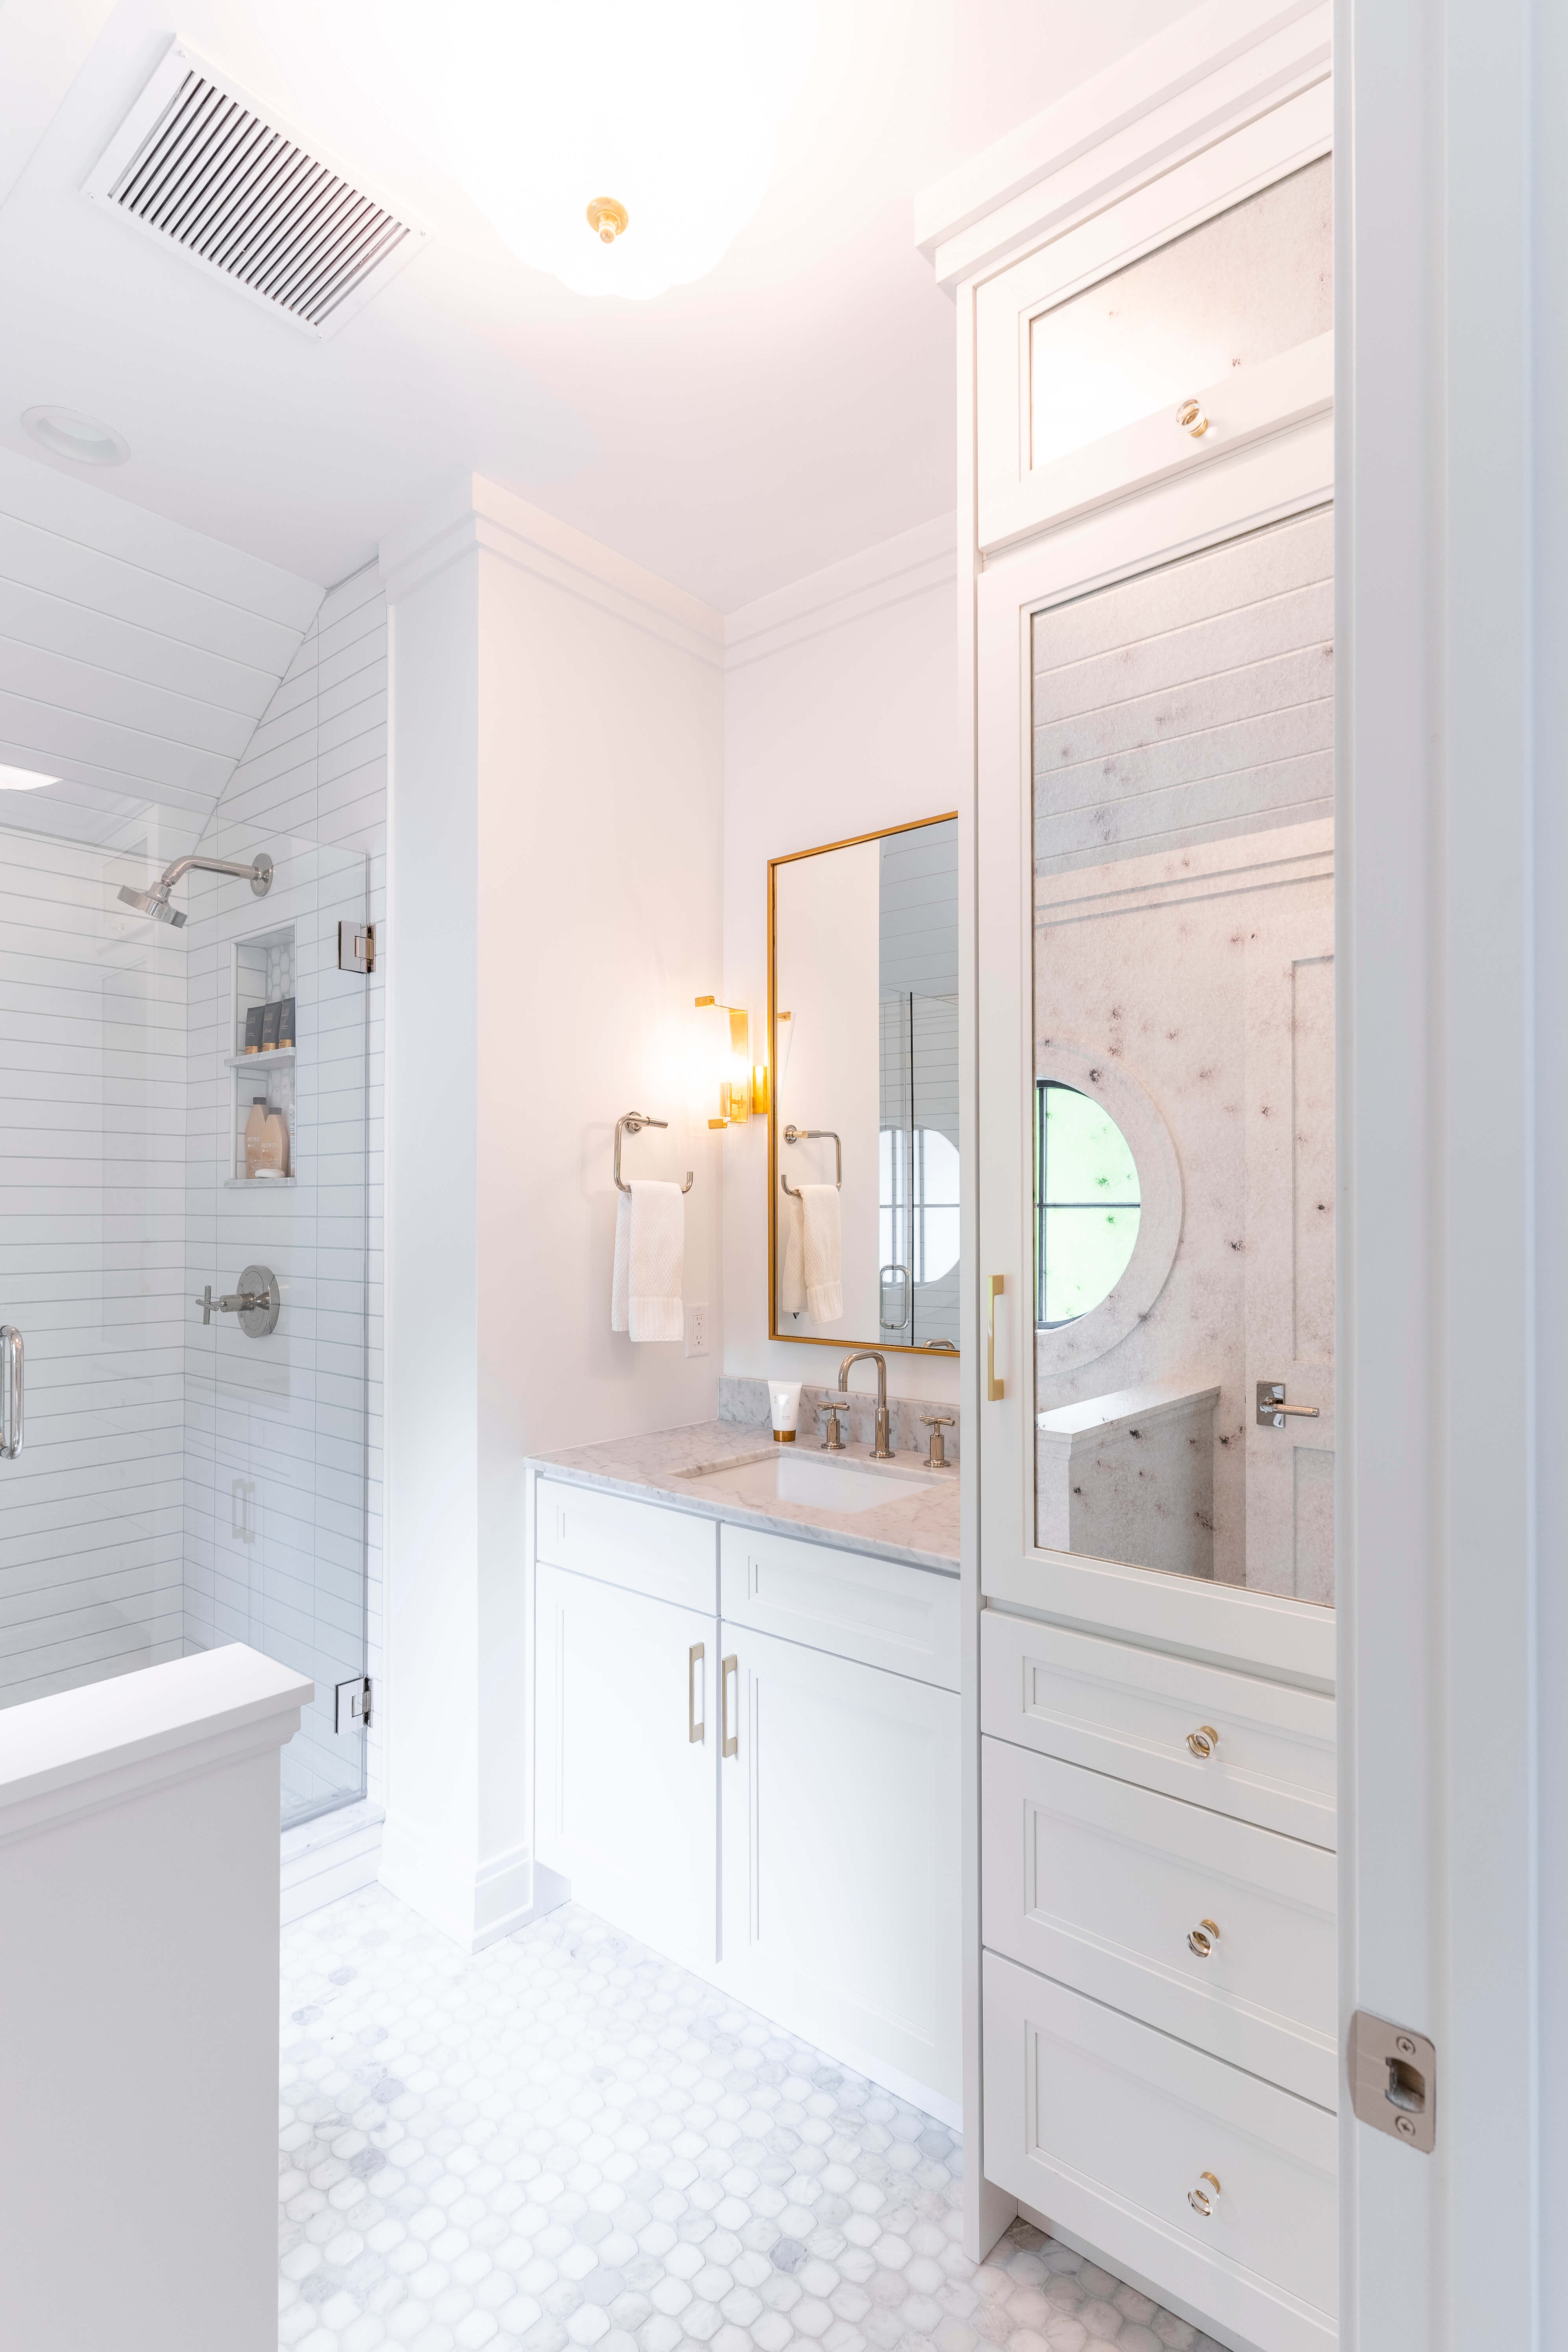 A bright all white bathroom design with white painted cabinets from Dura Supreme.